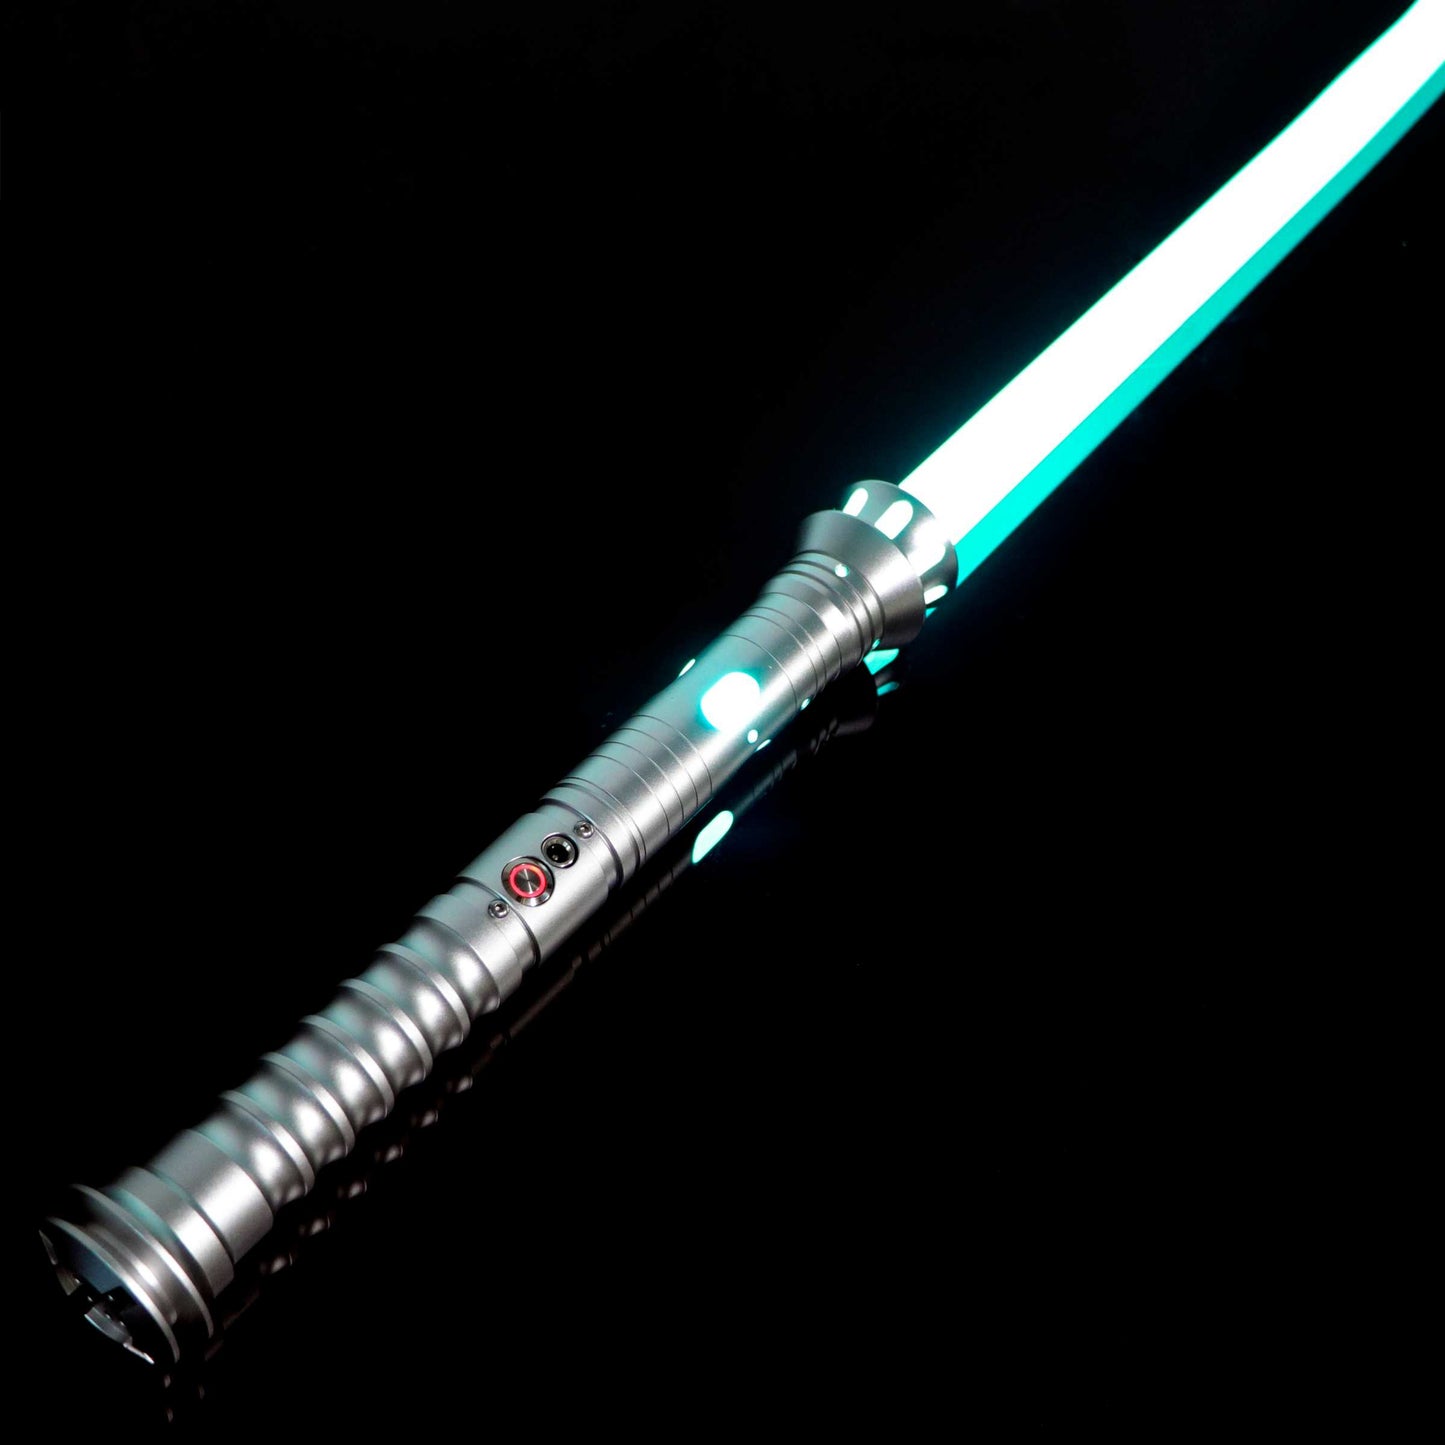 Caseo Neopixel Lightsaber Silver / RGB isabers